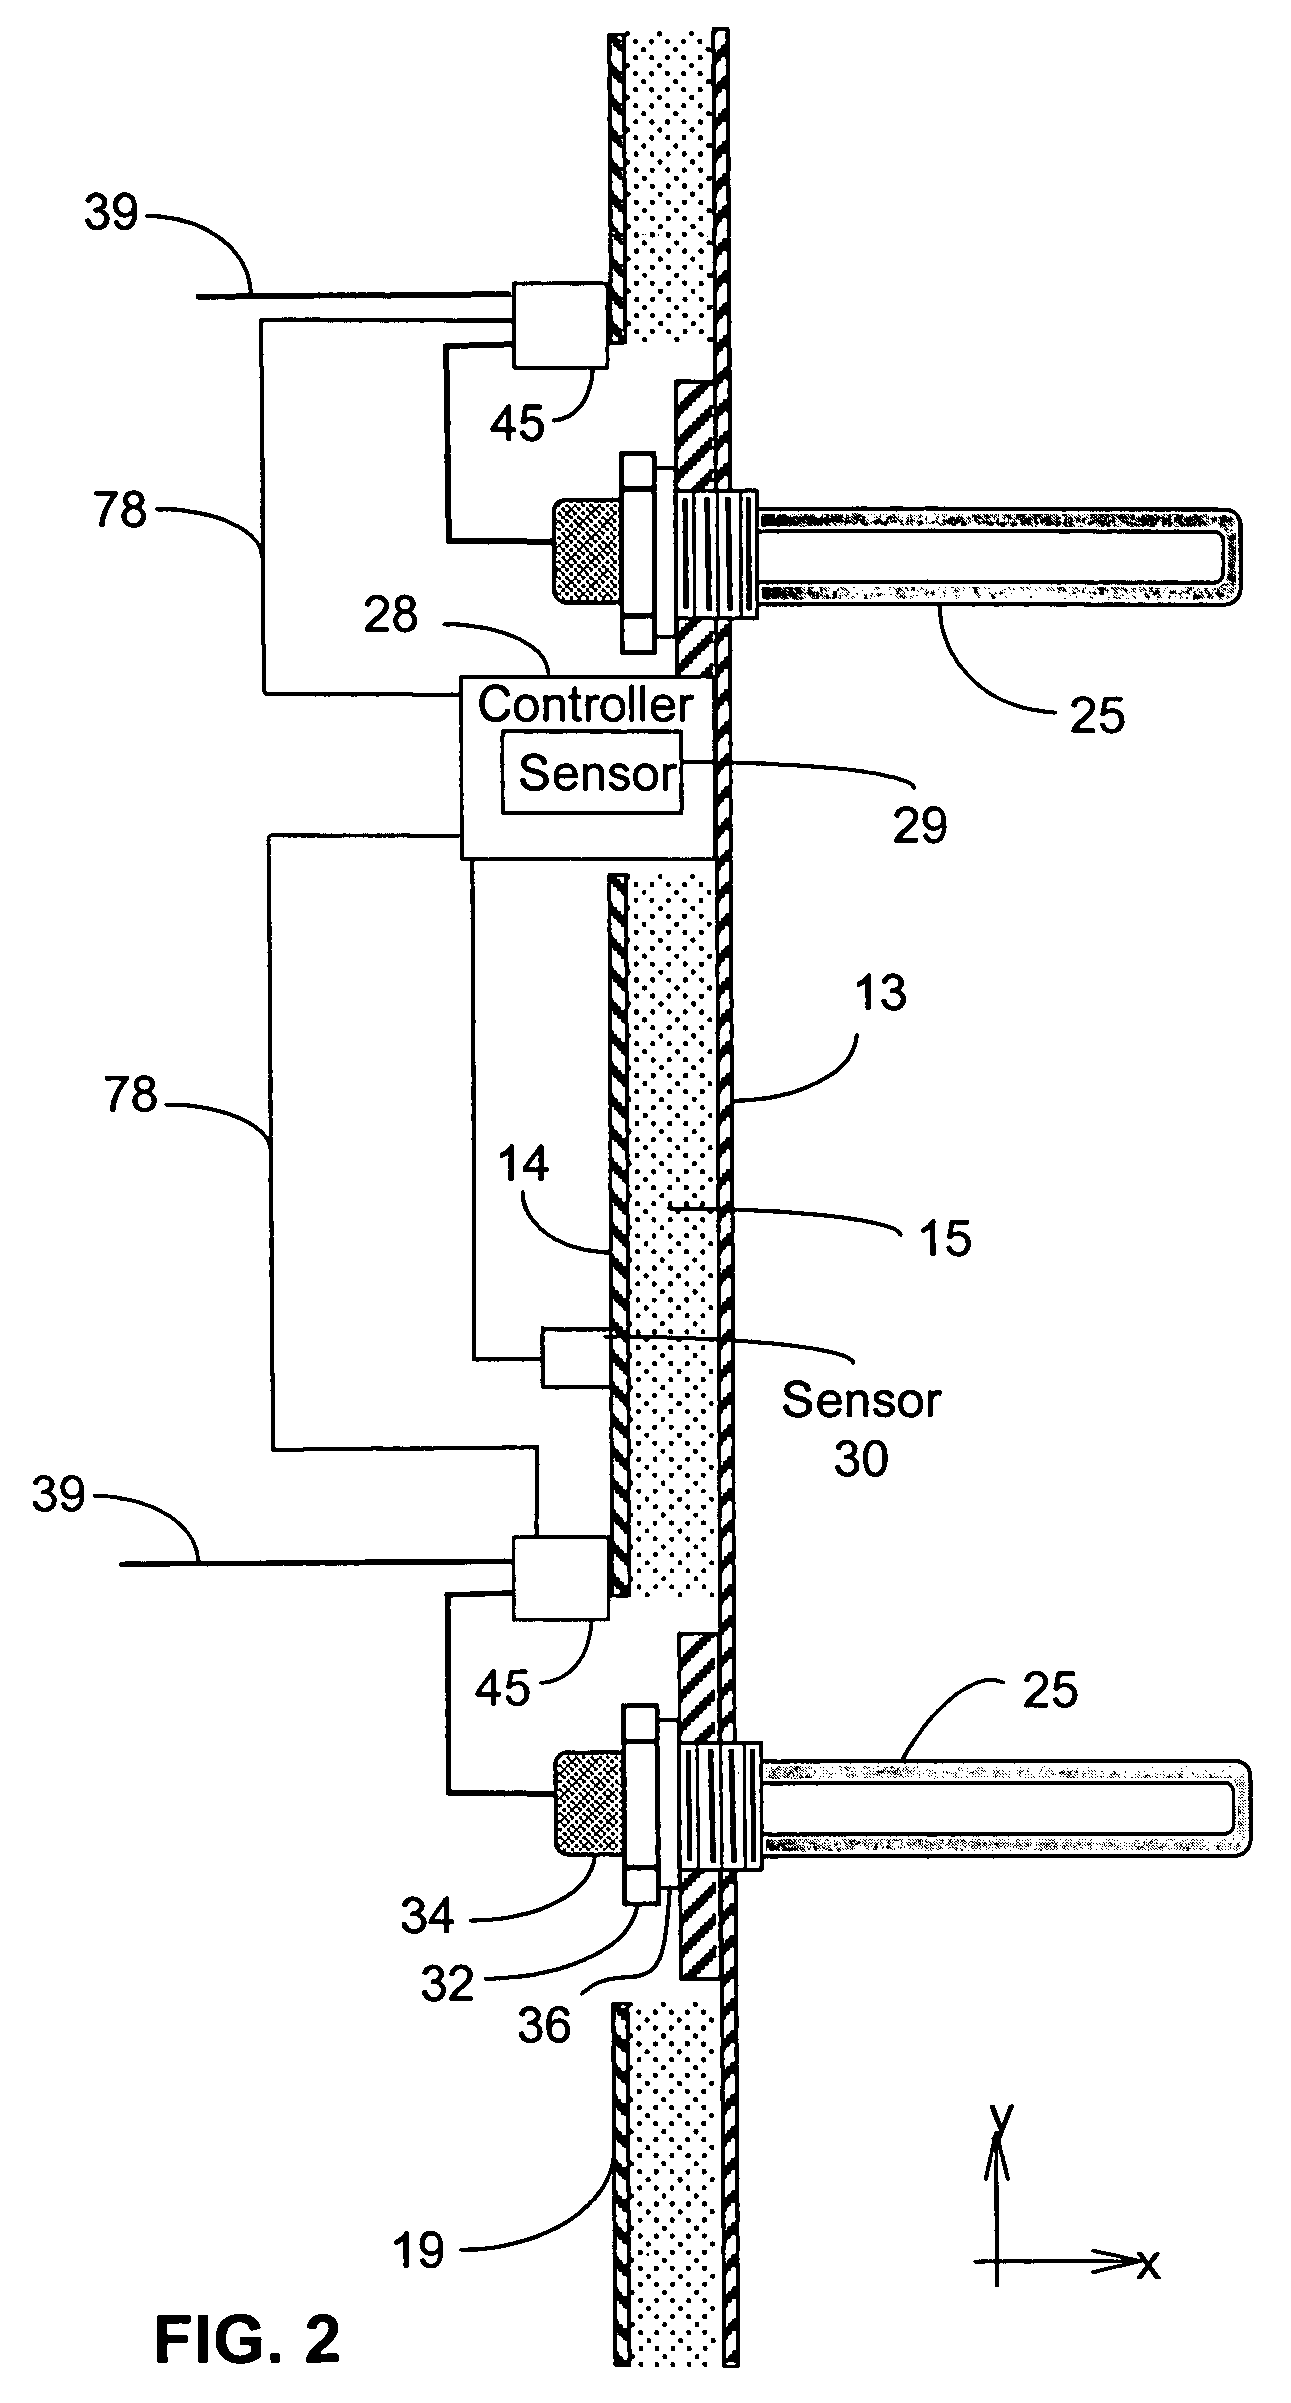 System and method for preventing overheating of water within a water heater tank